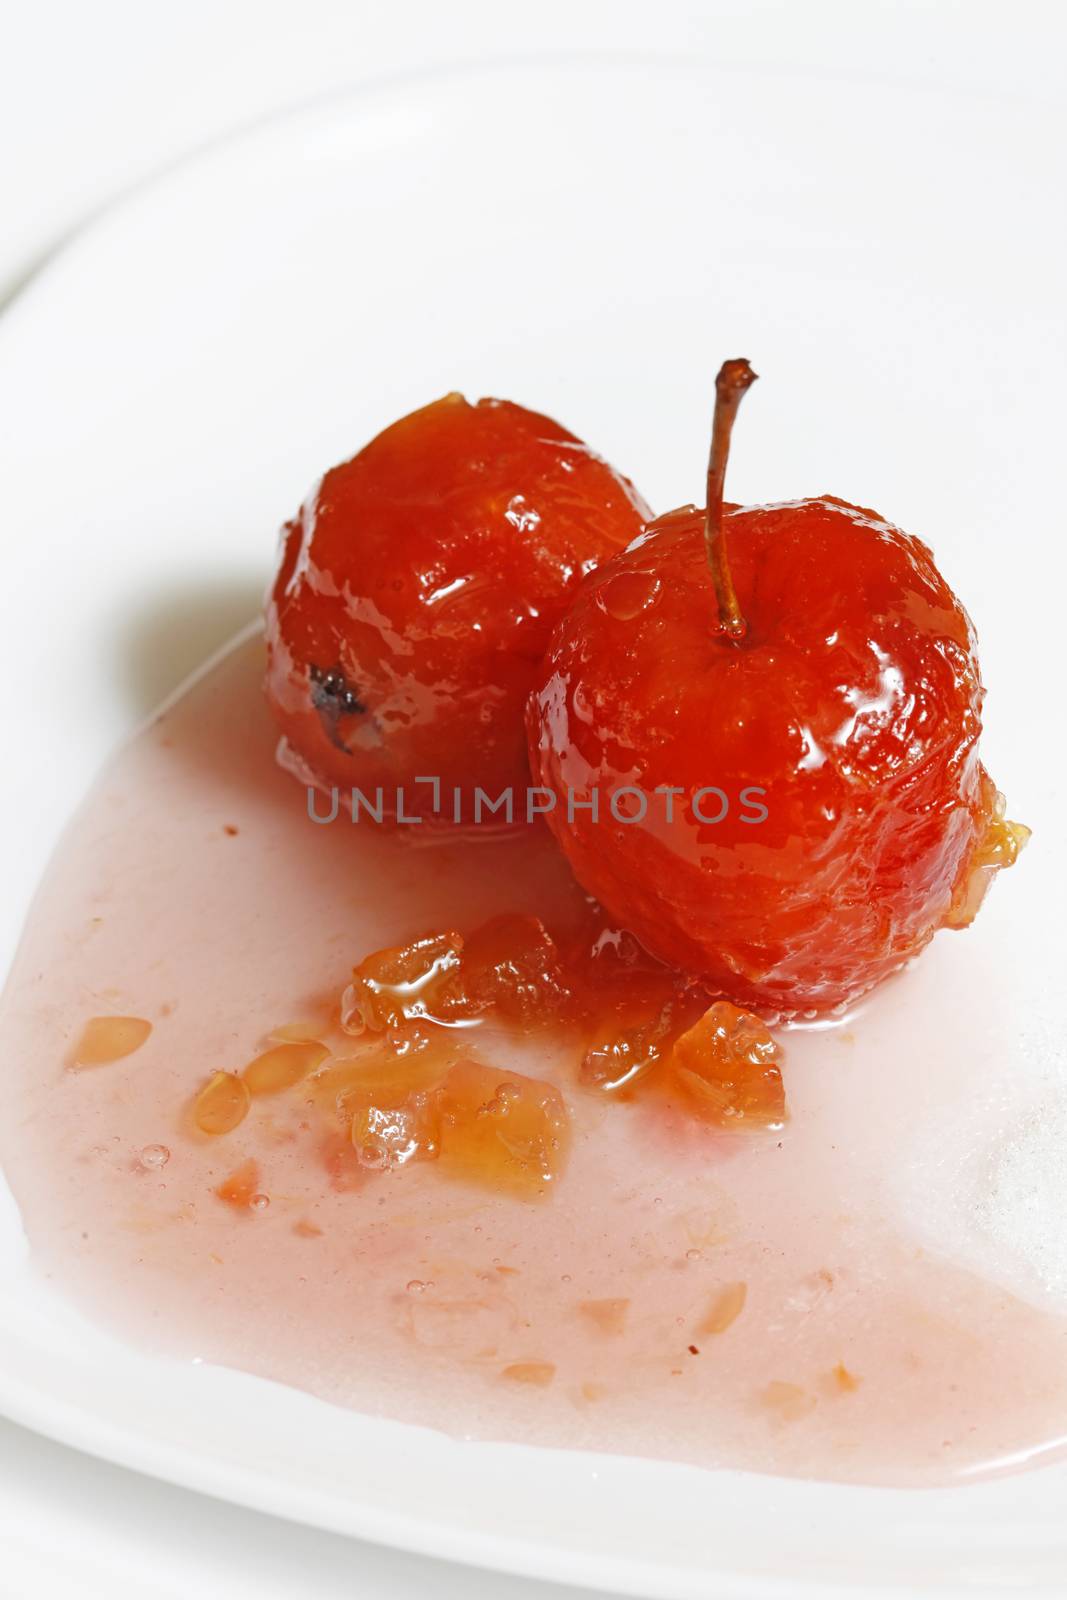 Red apple in rose syrup with small pieces of zucchini over isolated white background